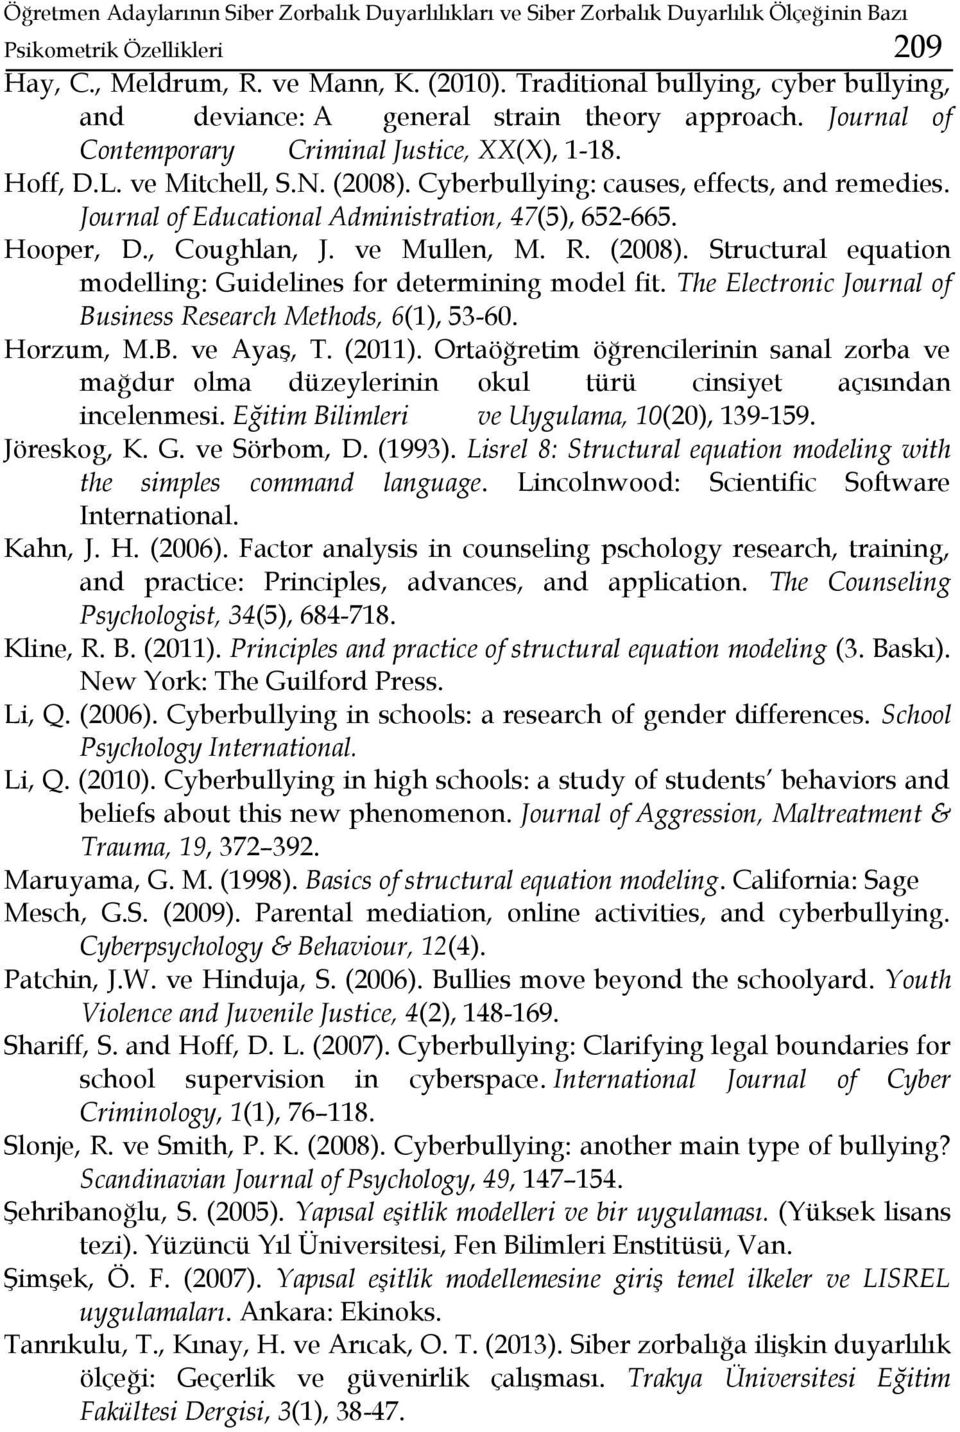 Cyberbullying: causes, effects, and remedies. Journal of Educational Administration, 47(5), 652-665. Hooper, D., Coughlan, J. ve Mullen, M. R. (2008).